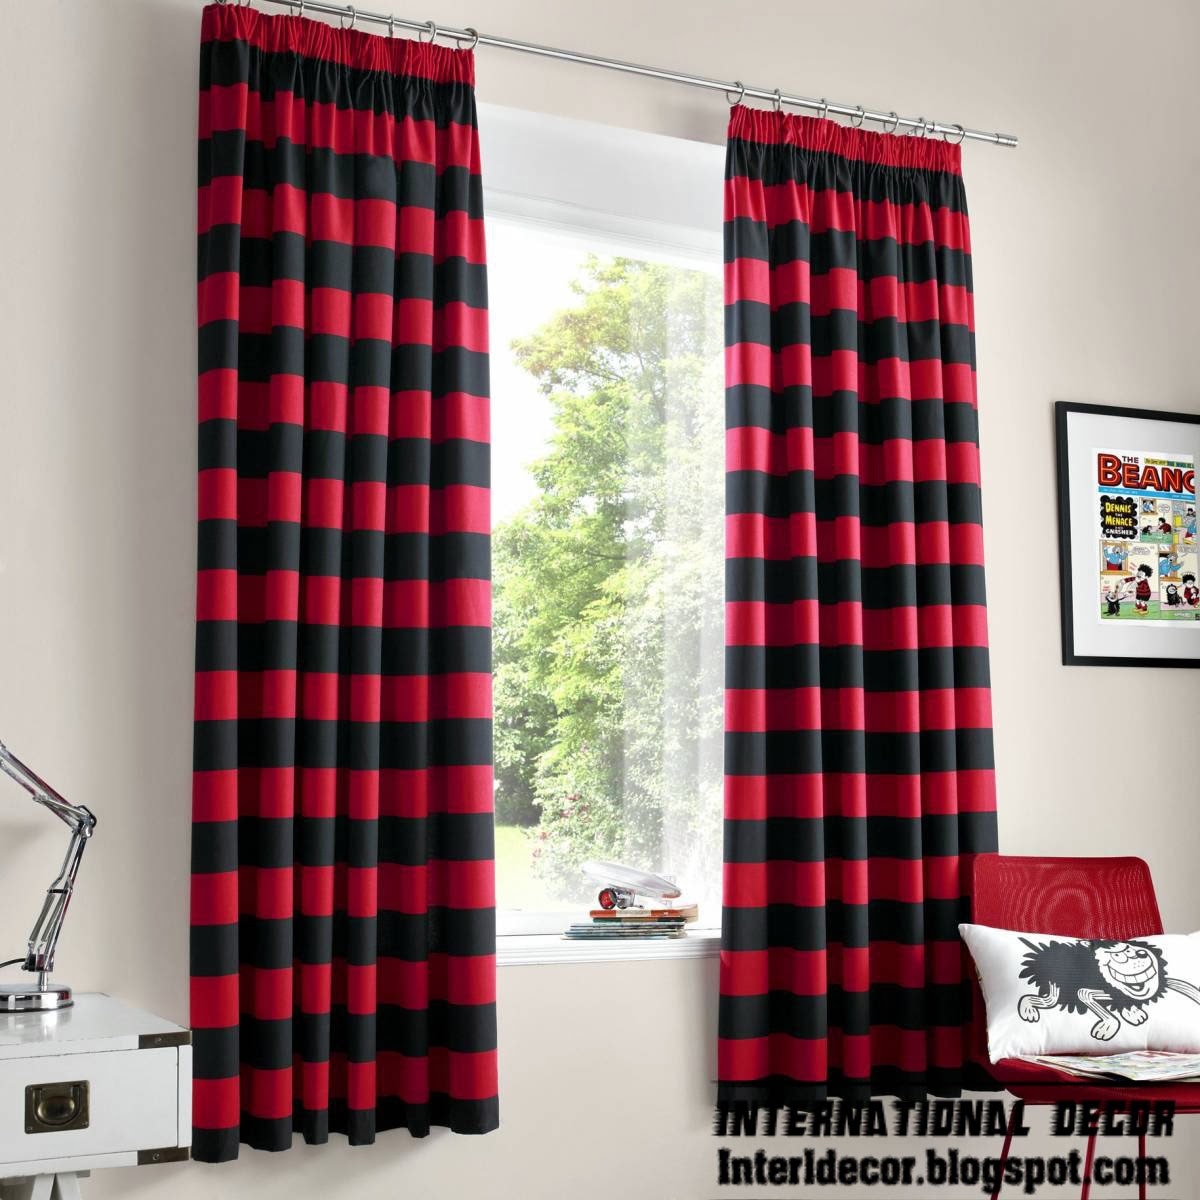 red curtains, red and black striped curtain and window treatments